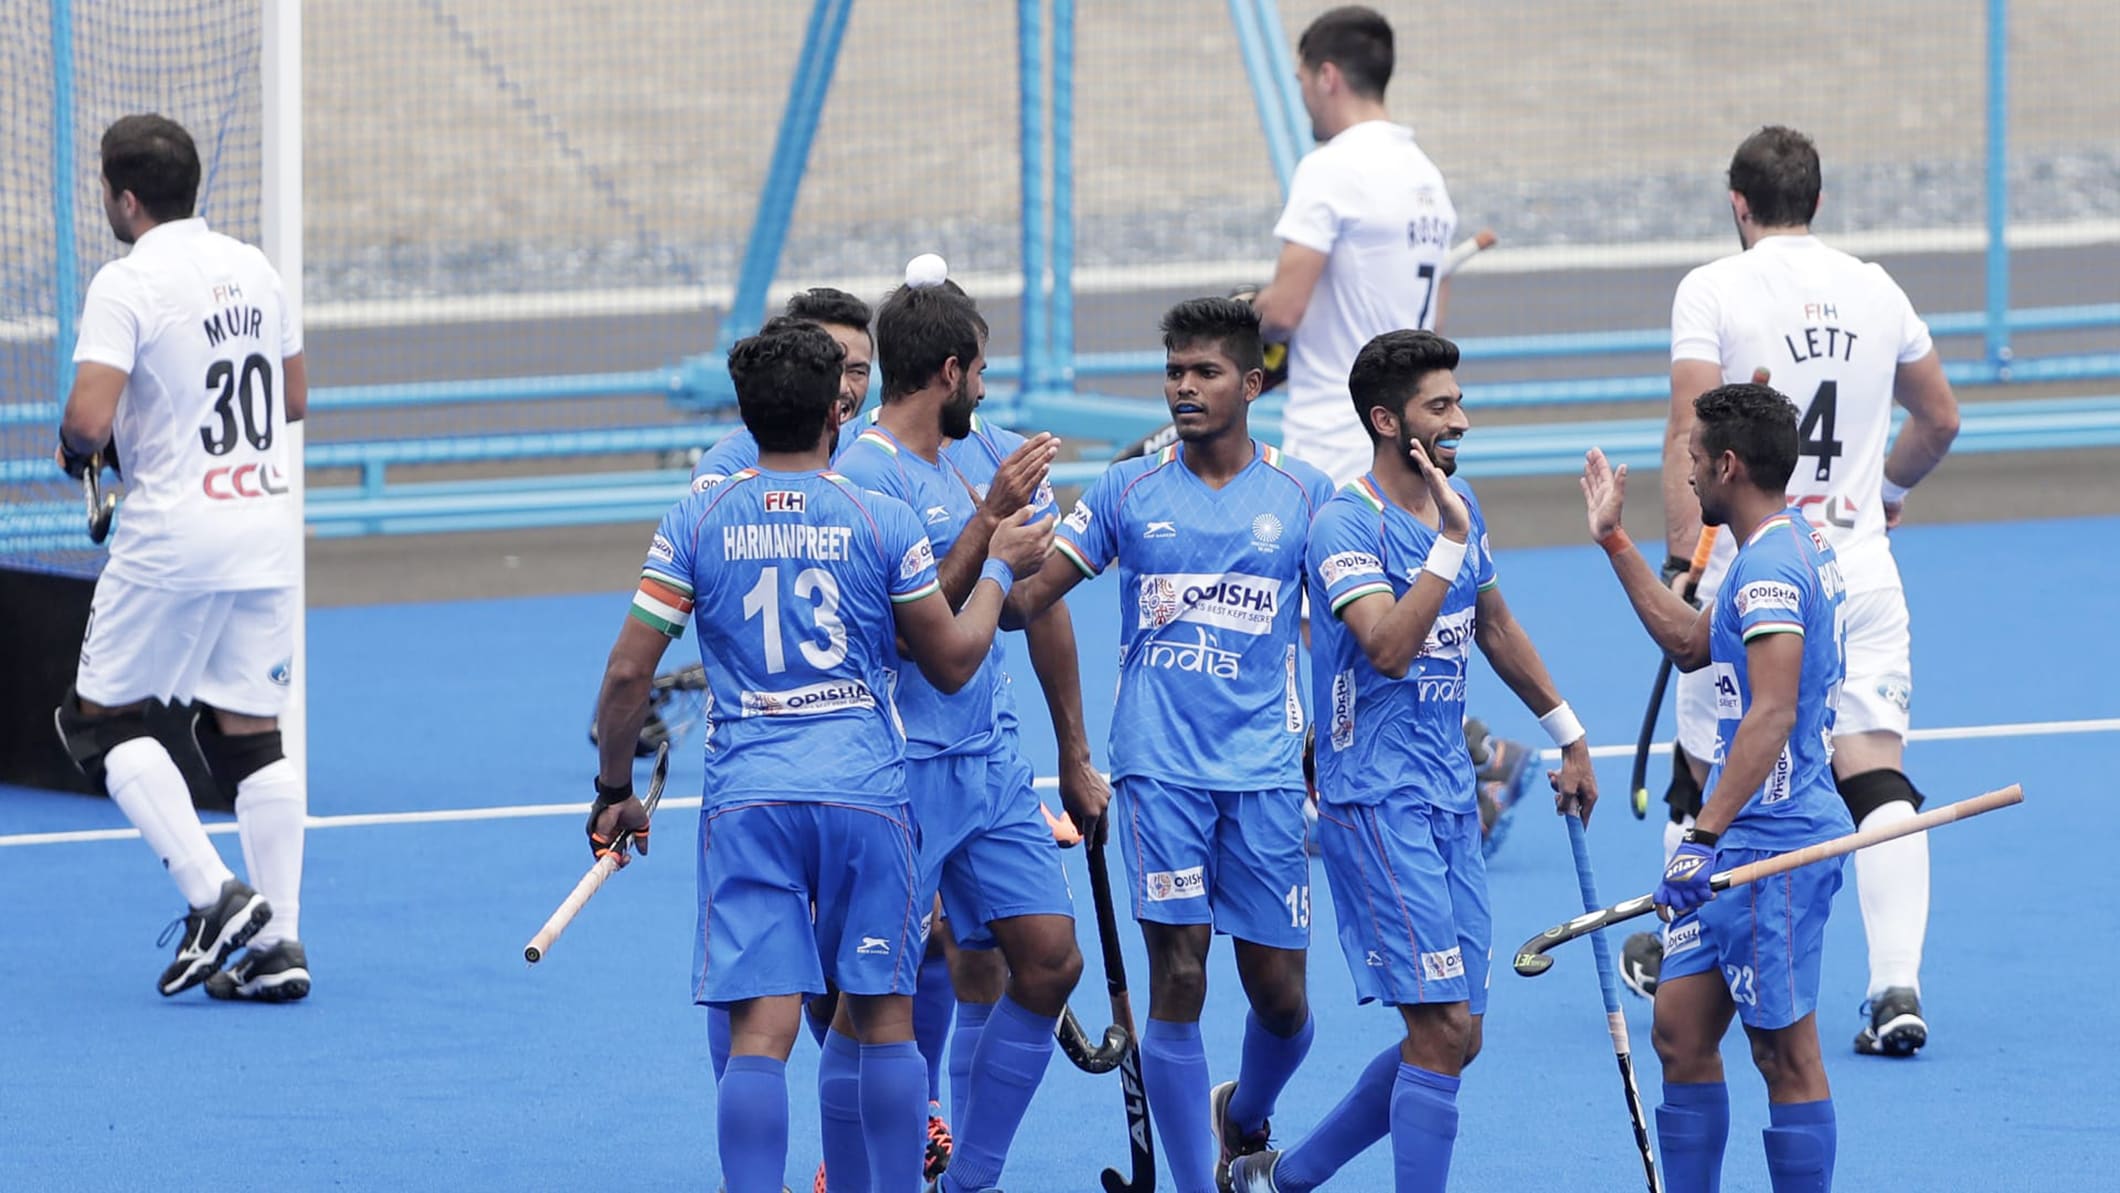 Getty Images "Shamsher Singh (2nd r) celebrates after putting India 2-0 up against New Zealand"